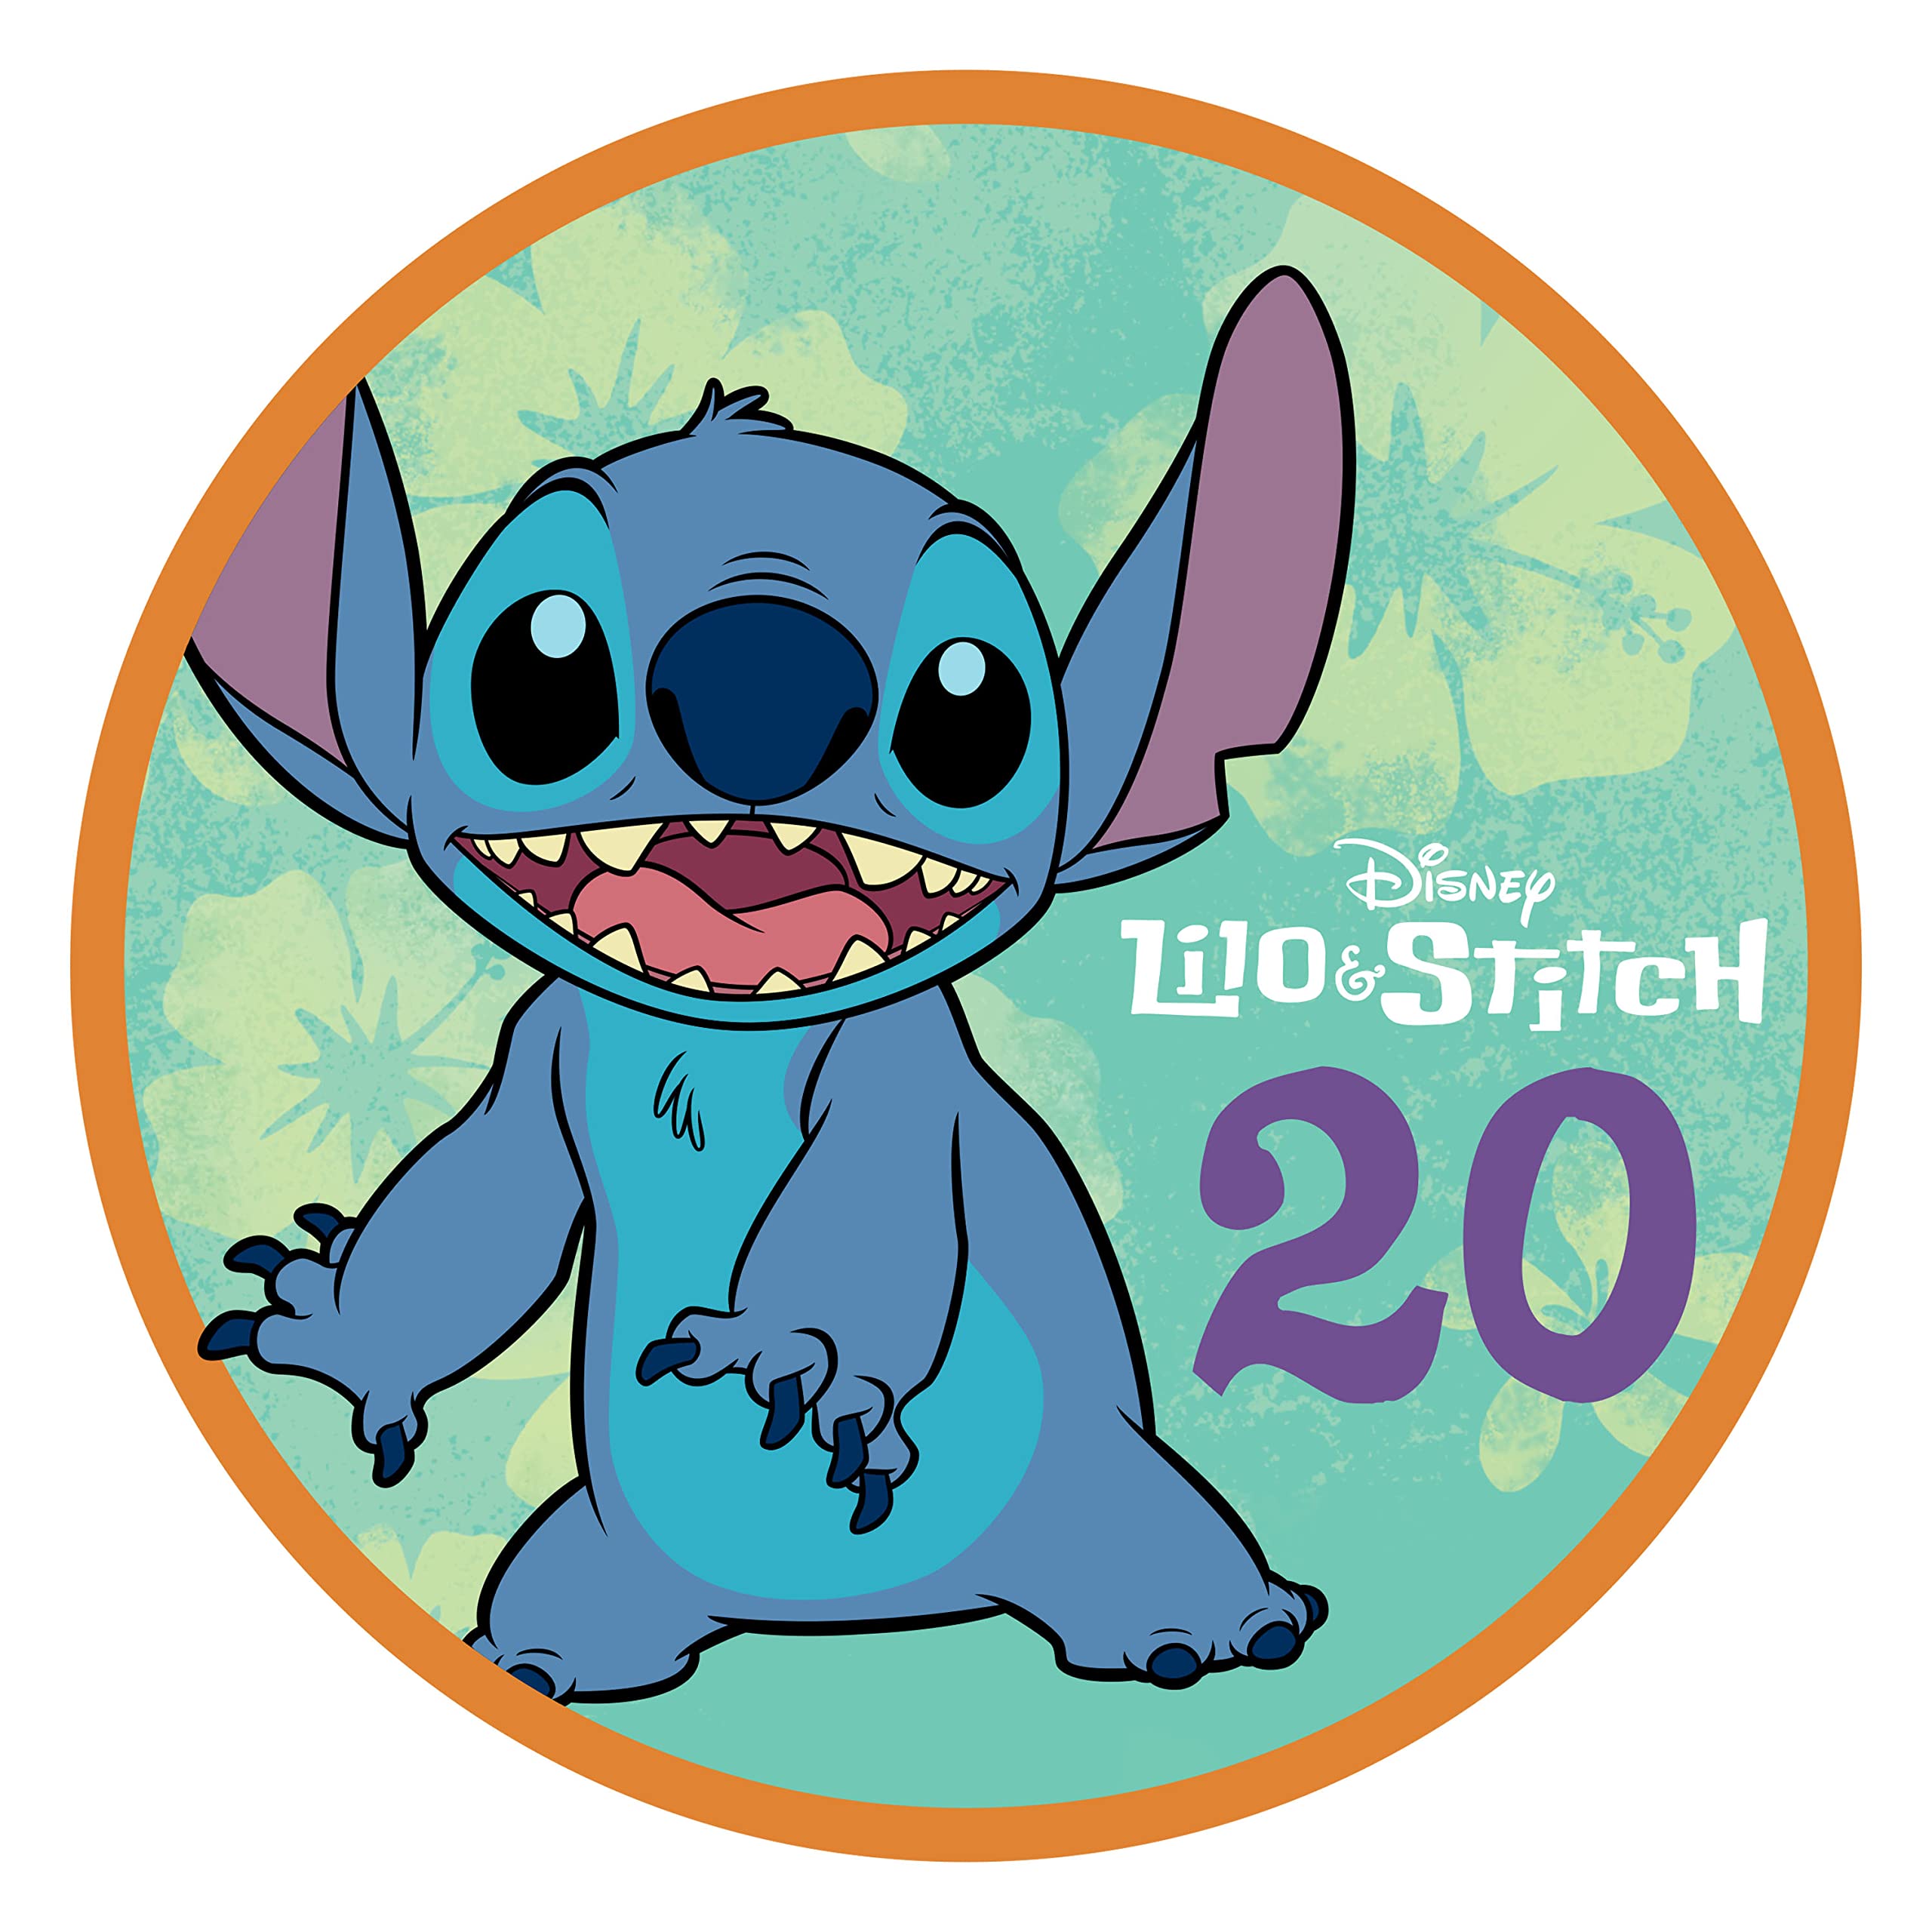 Disney Lilo & Stitch 20th Anniversary Collectible Experiment 626 Plush Stuffed Animal, Kids Toys for Ages 3 Up by Just Play